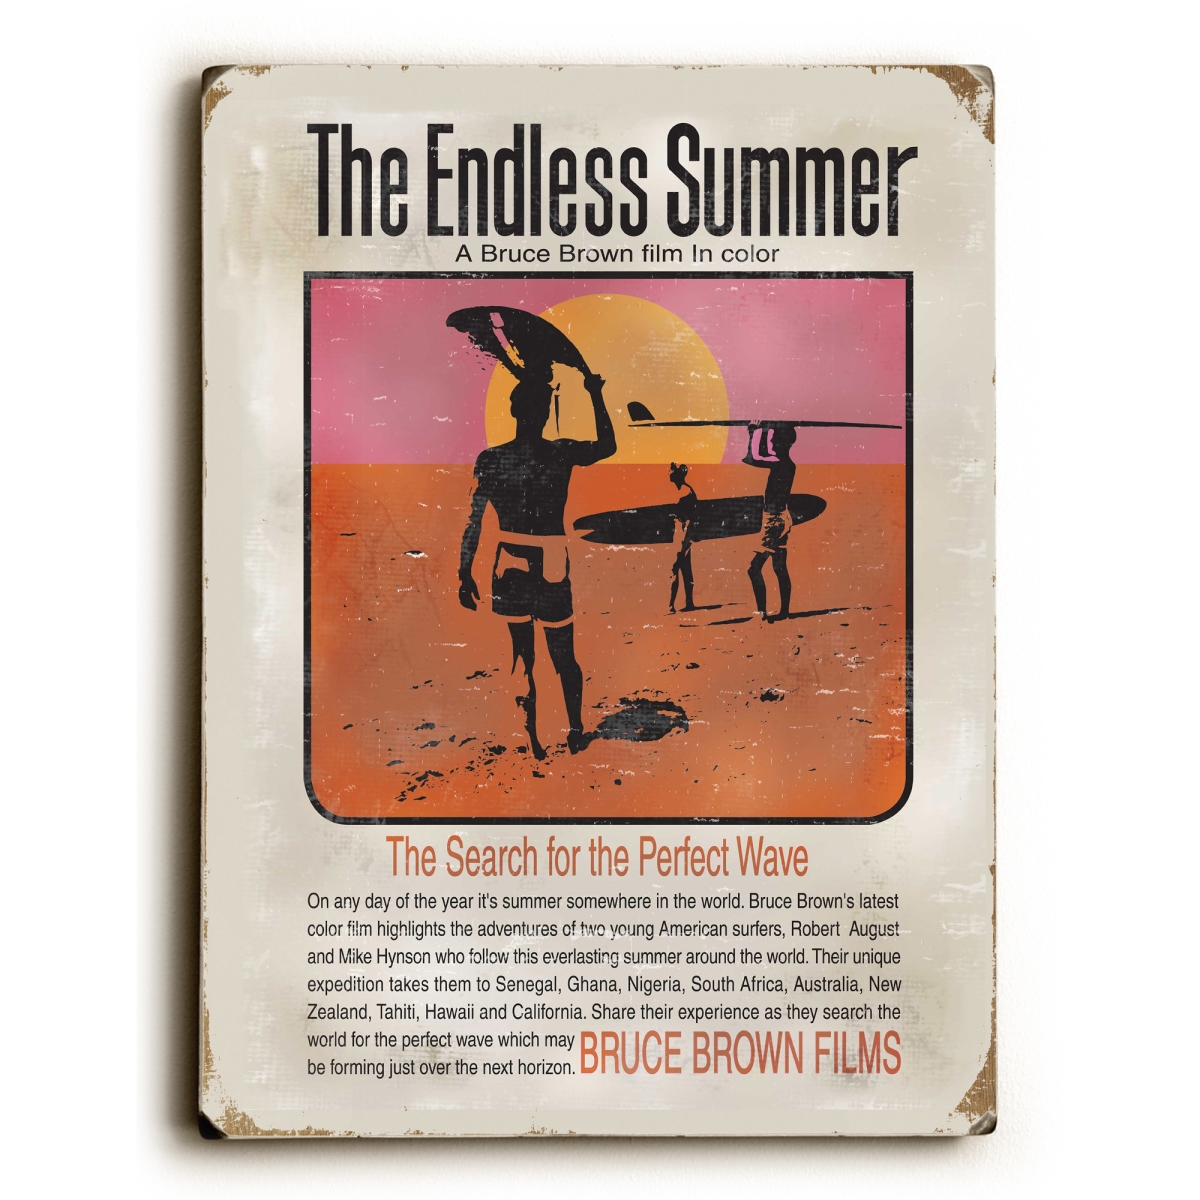 0002-9906-25 9 X 12 In. Endless Summer Movie Poster Solid Wood Wall Decor By Bruce Brown